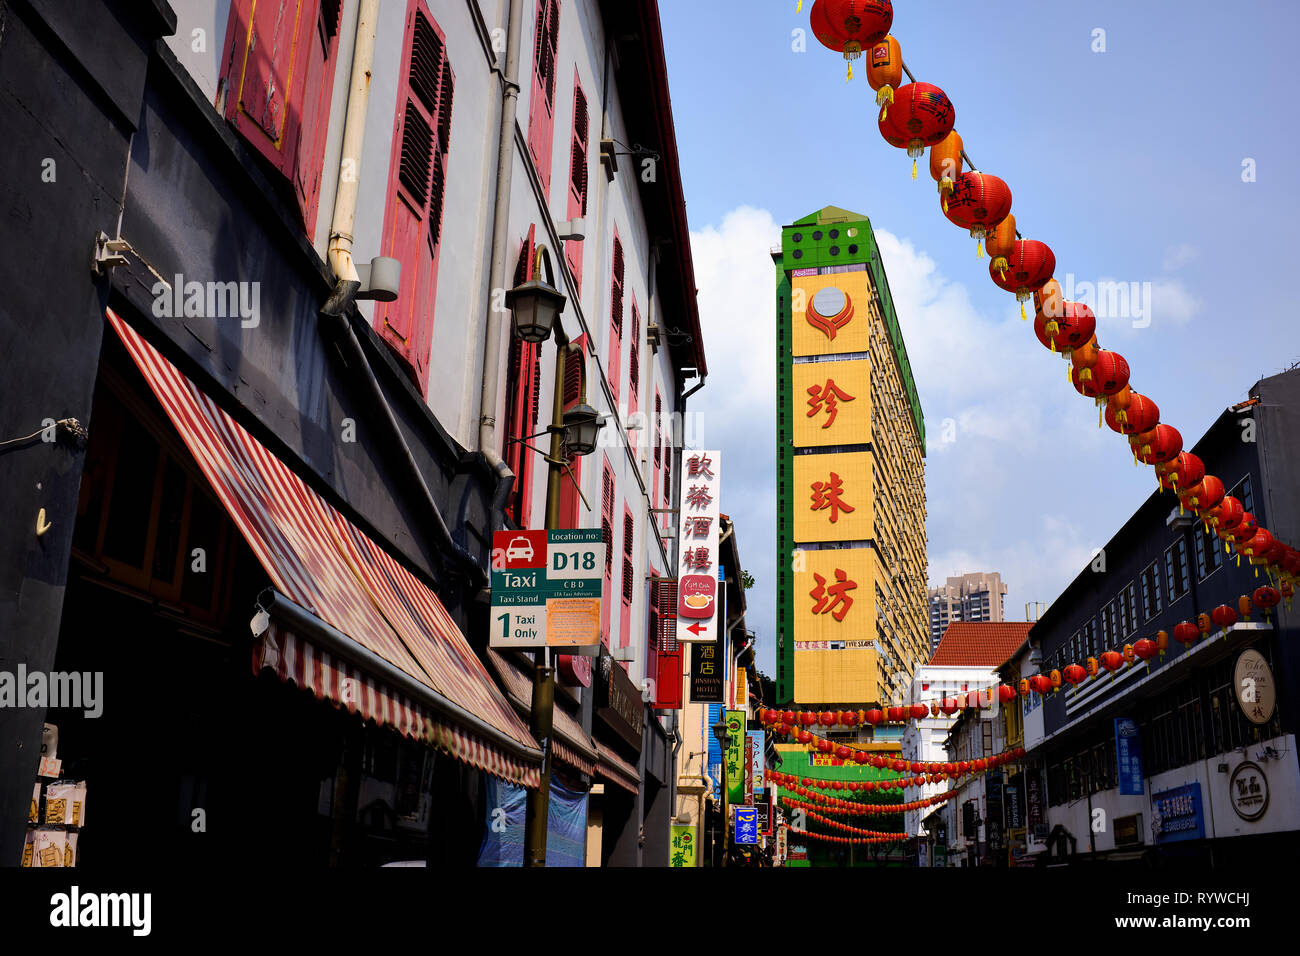 Pictured is China Town at Singapore. Stock Photo